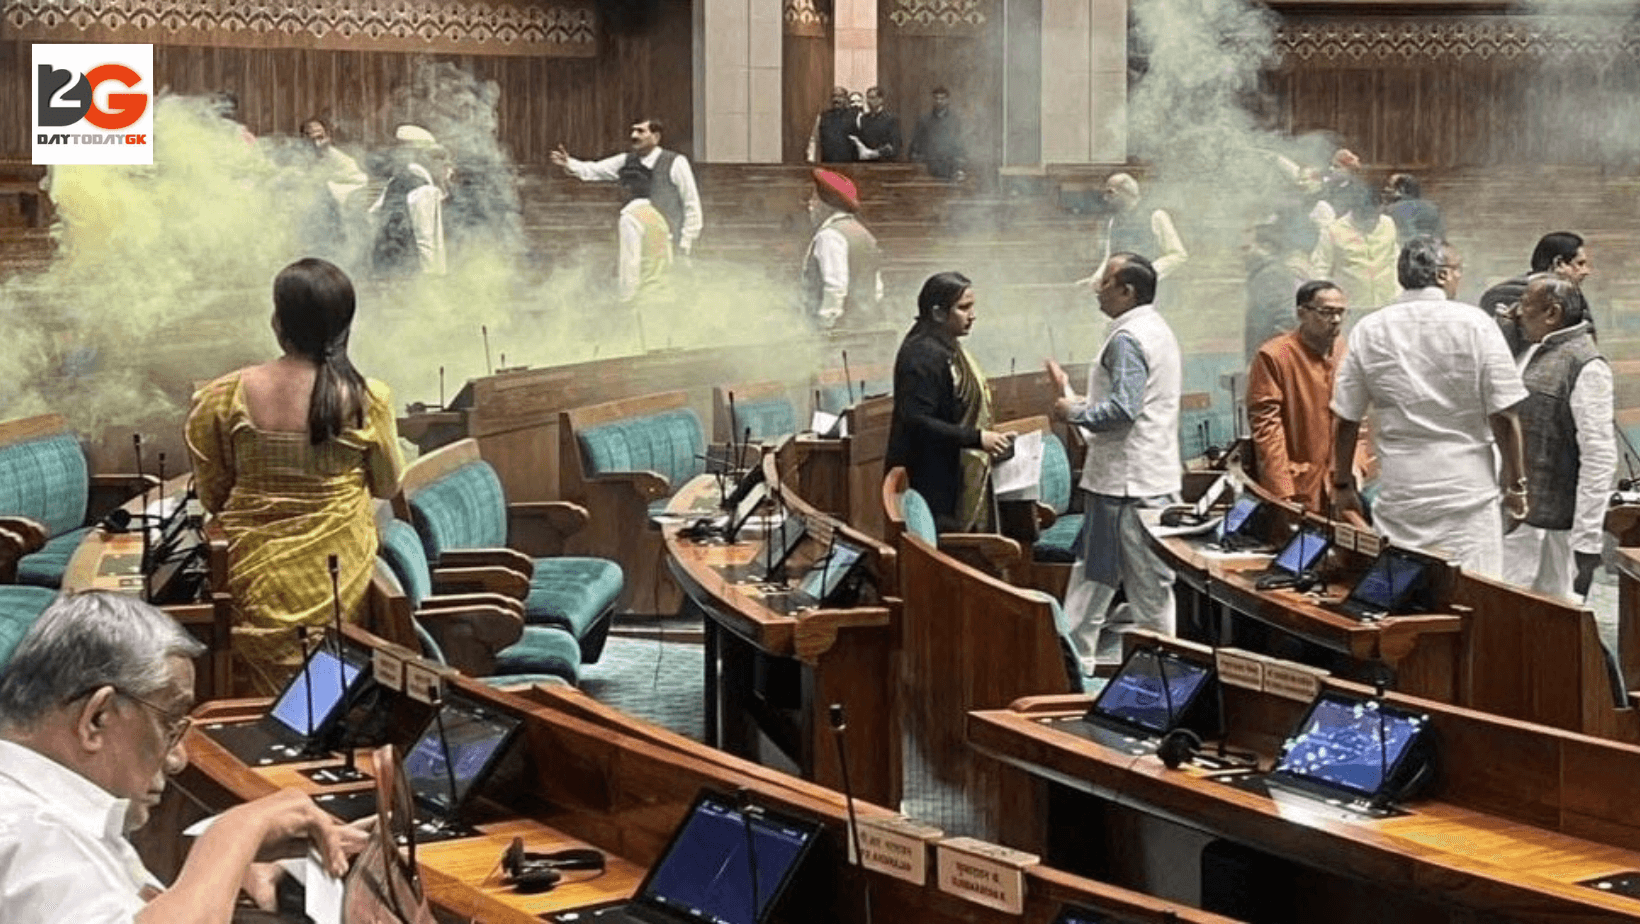 Parliament security breach : 2 intruders jump from gallery, spray gas